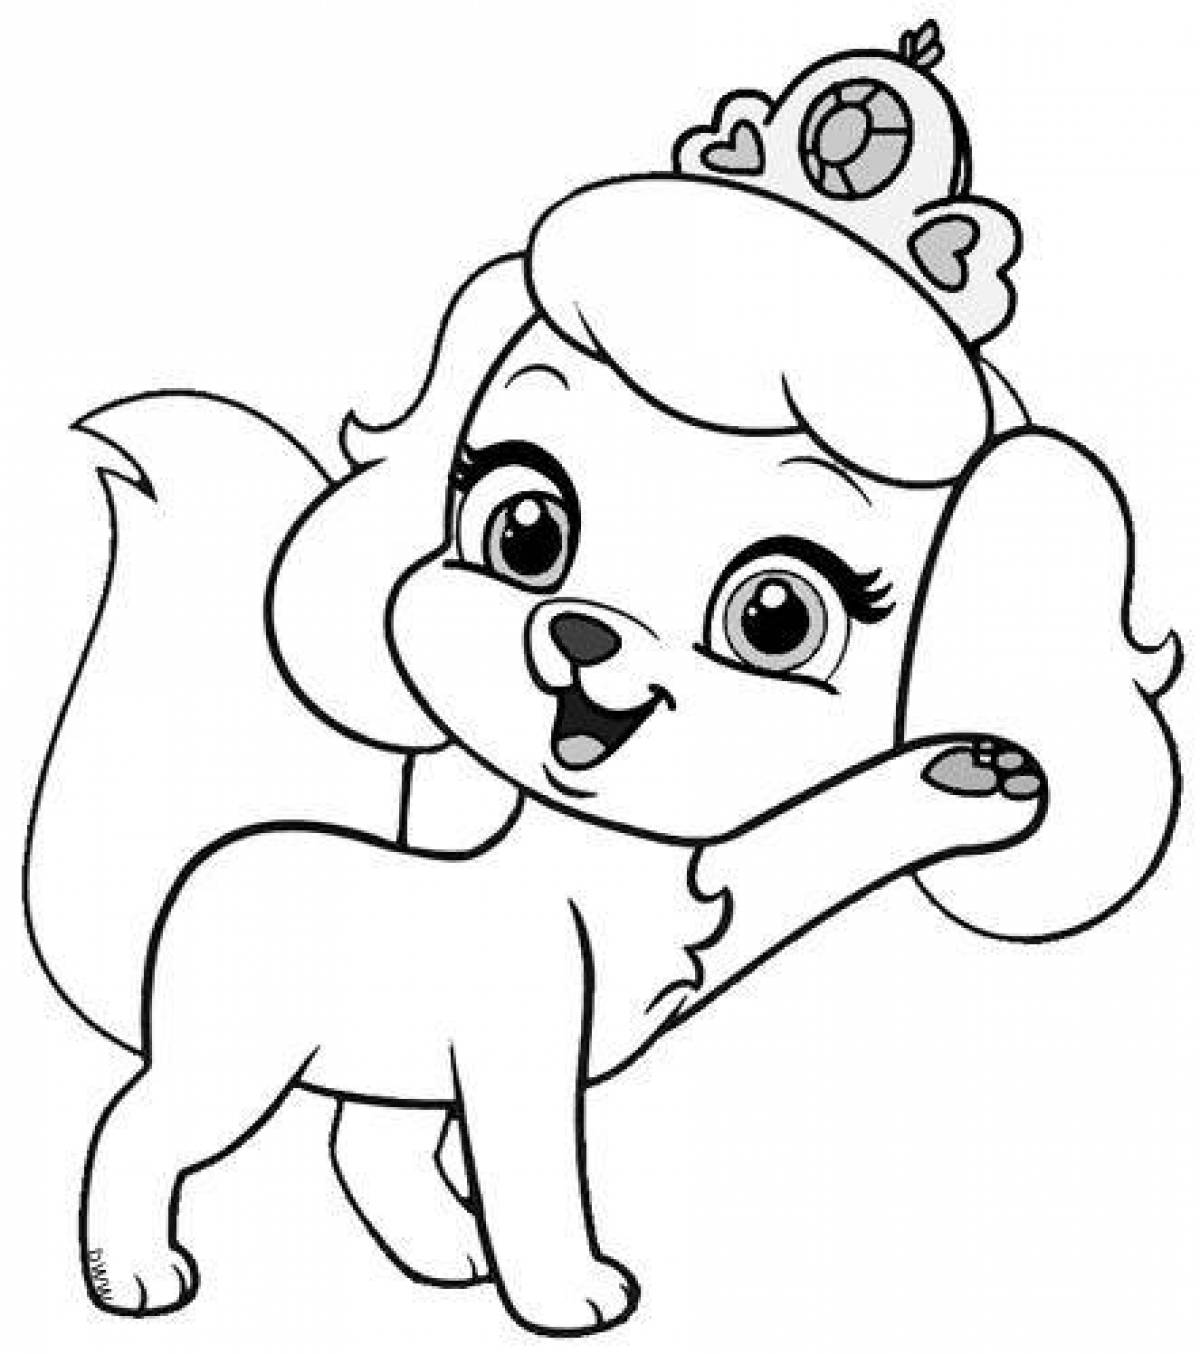 Dazzling coloring book for girls dogs cats